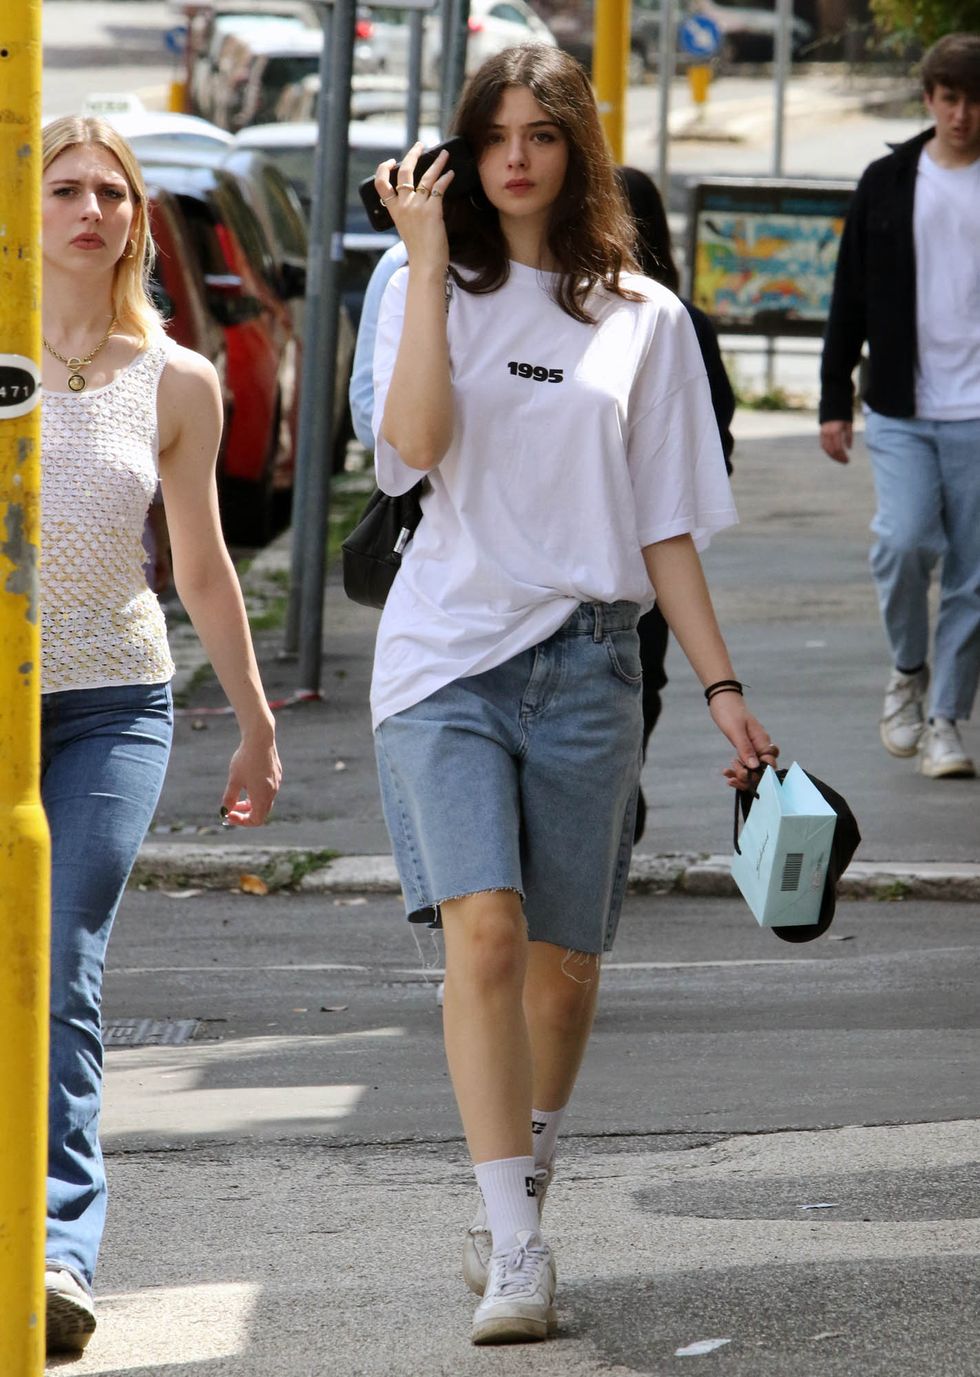 exclusive model deva cassel, monica bellucci and vincent cassel's daughter, spotted shopping in rome with a friend 09 may 2023 pictured deva cassel photo credit oliver palombi mega themegaagencycom 1 888 505 6342